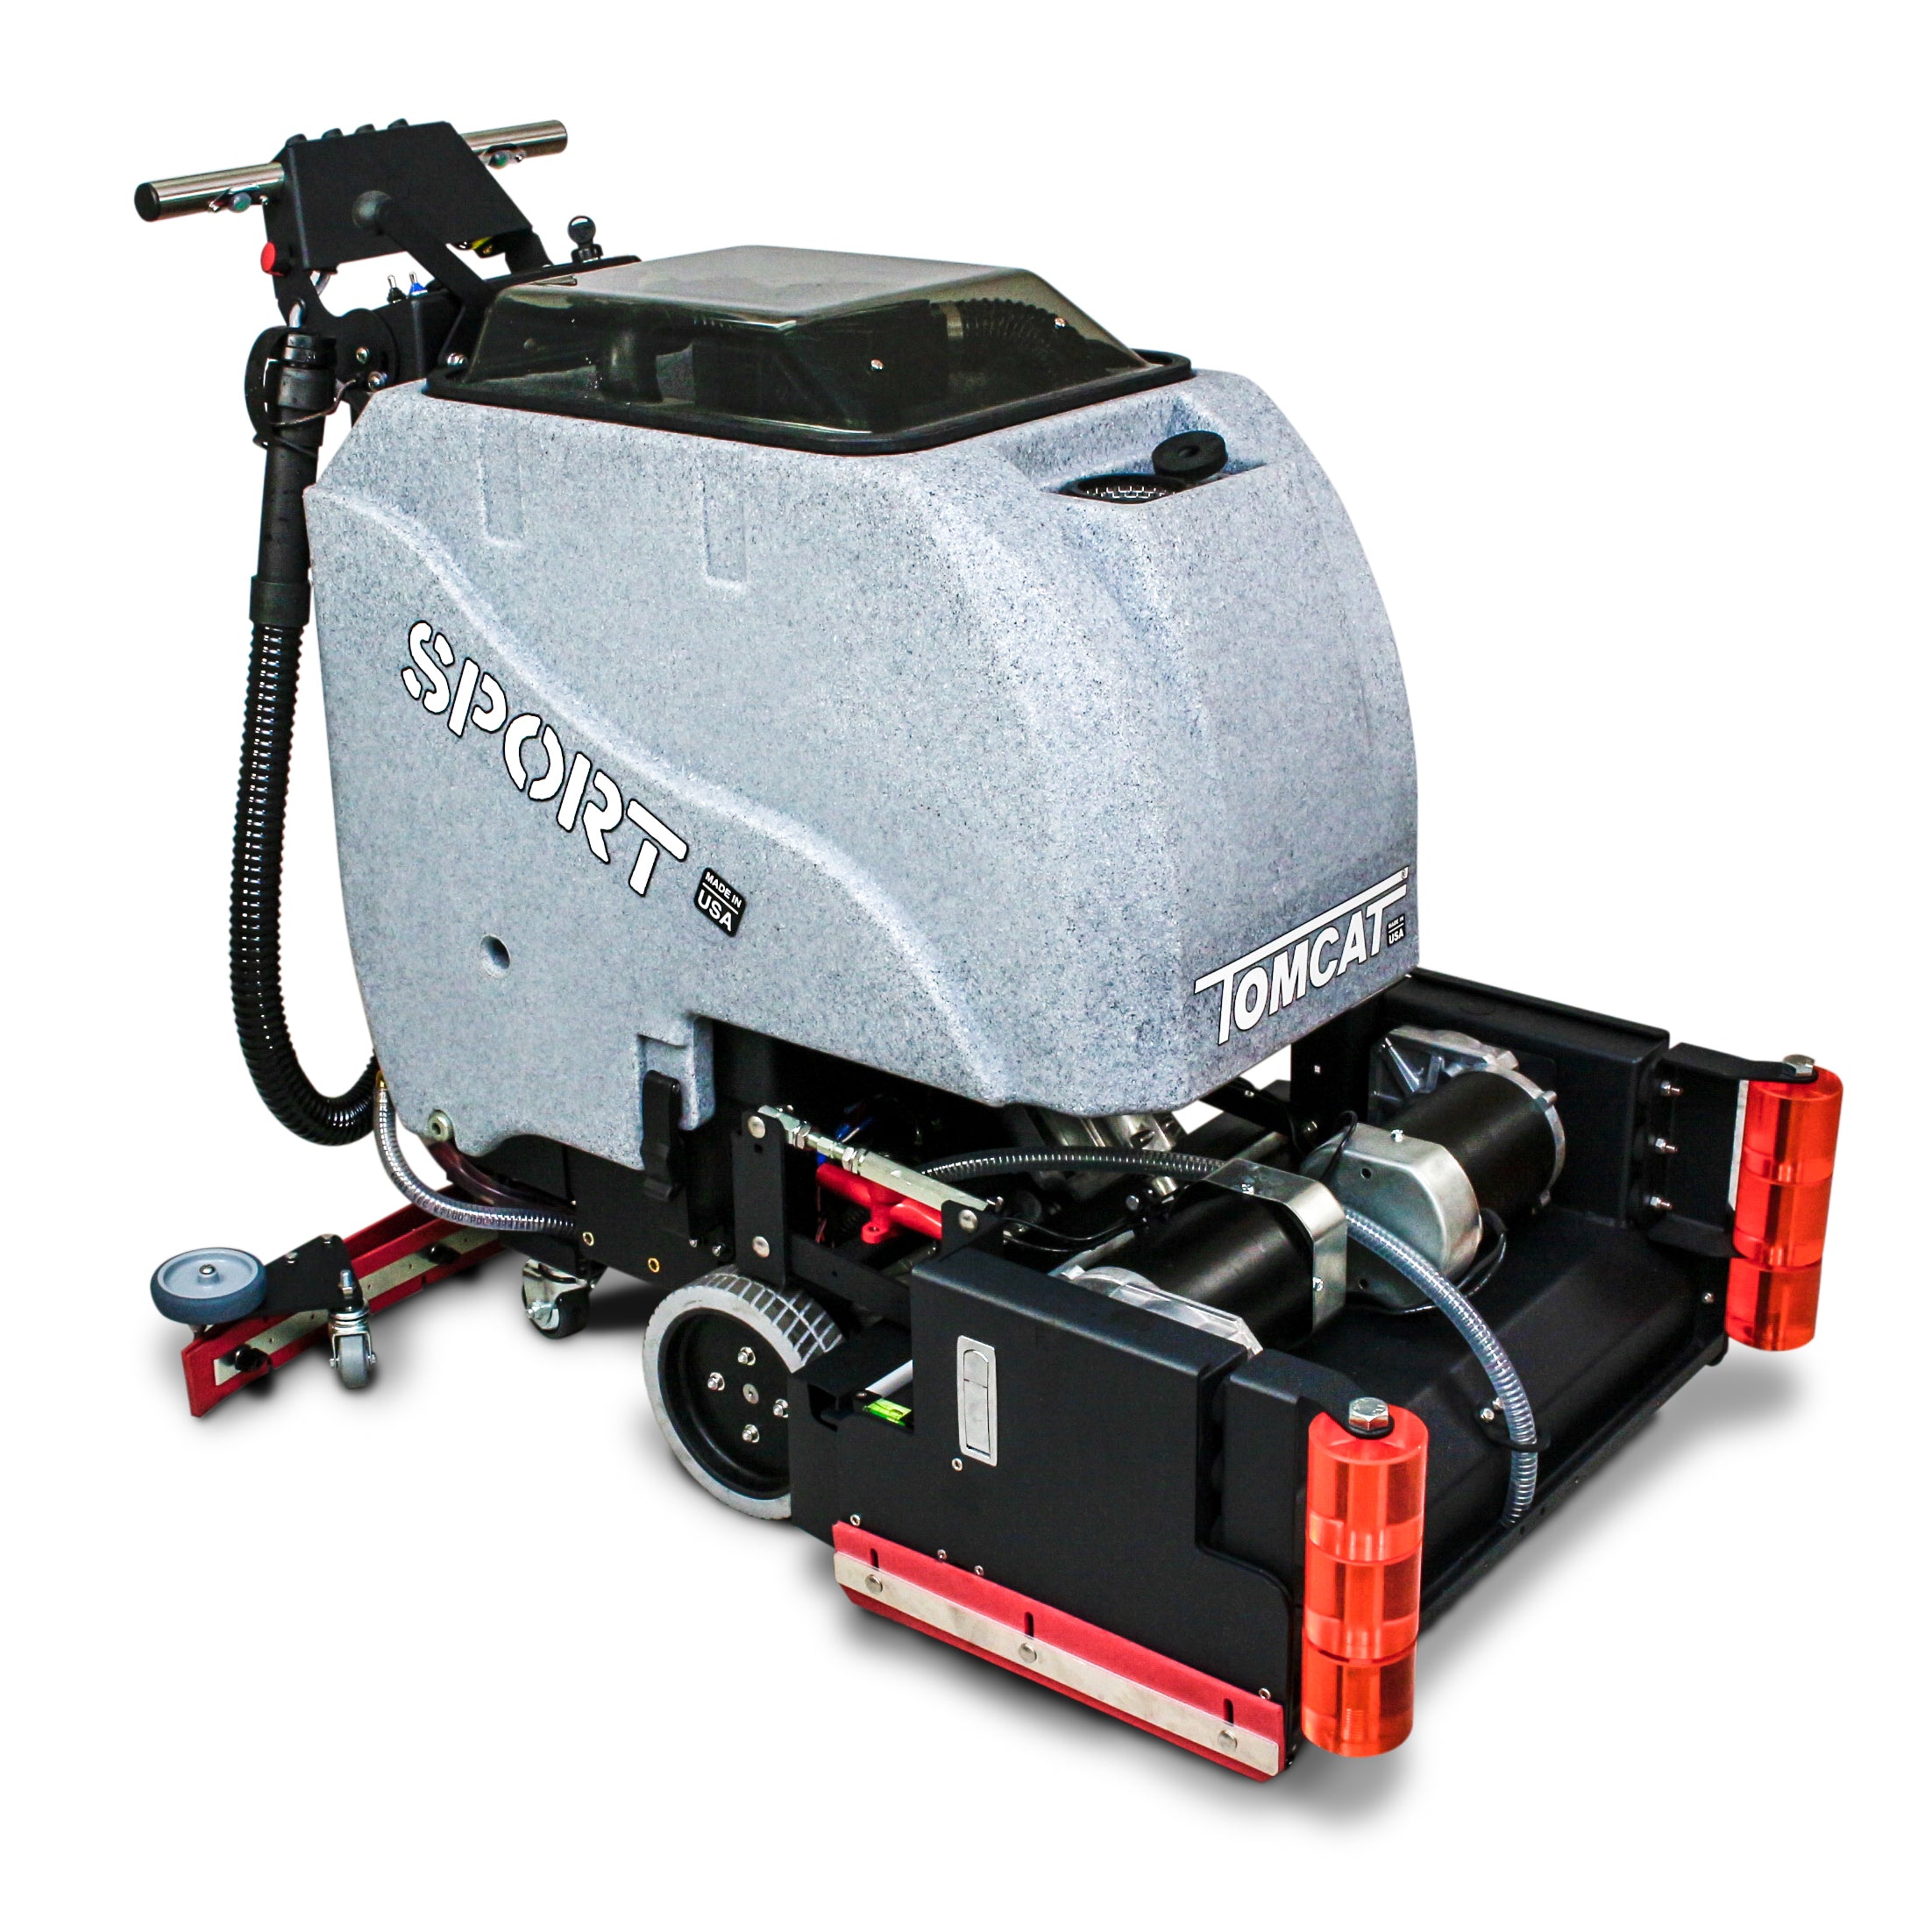 TOMCAT SPORT 25" CYLINDRICAL SCRUBBER DRIER - Ruck Engineering